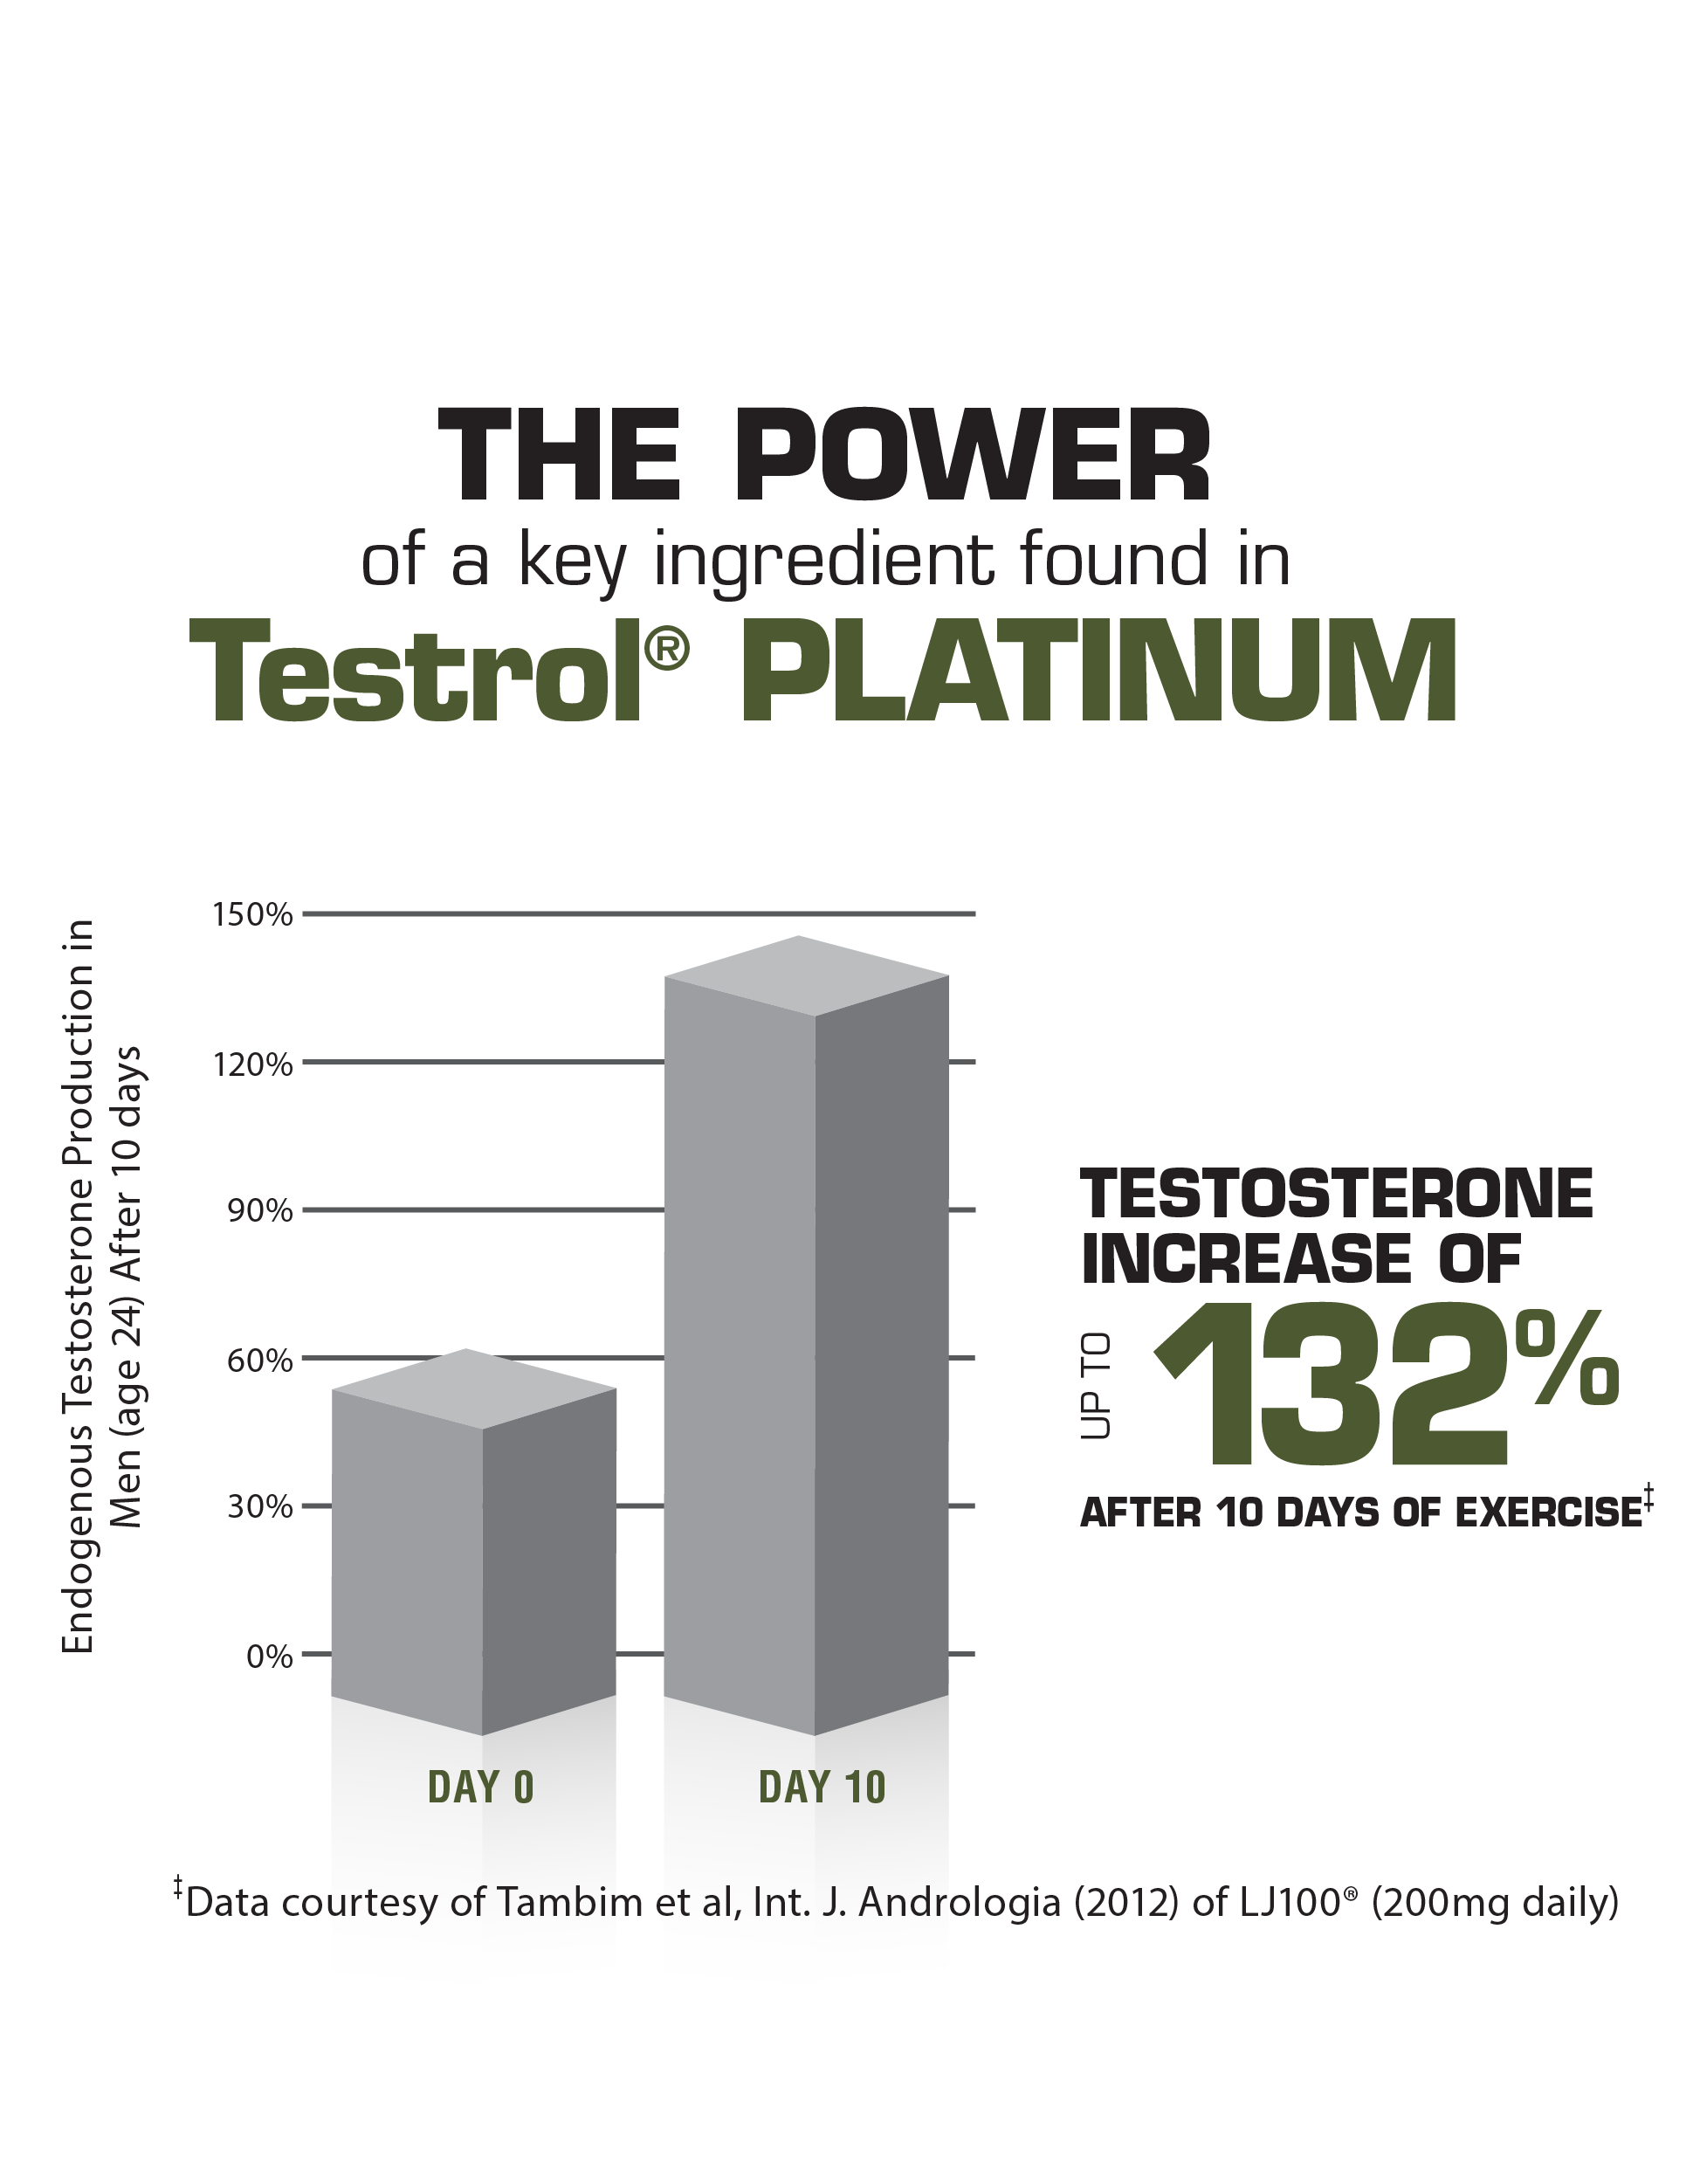 Testrol Platinum chart, up to 132% Testosterone Increase after 10 days of exercise